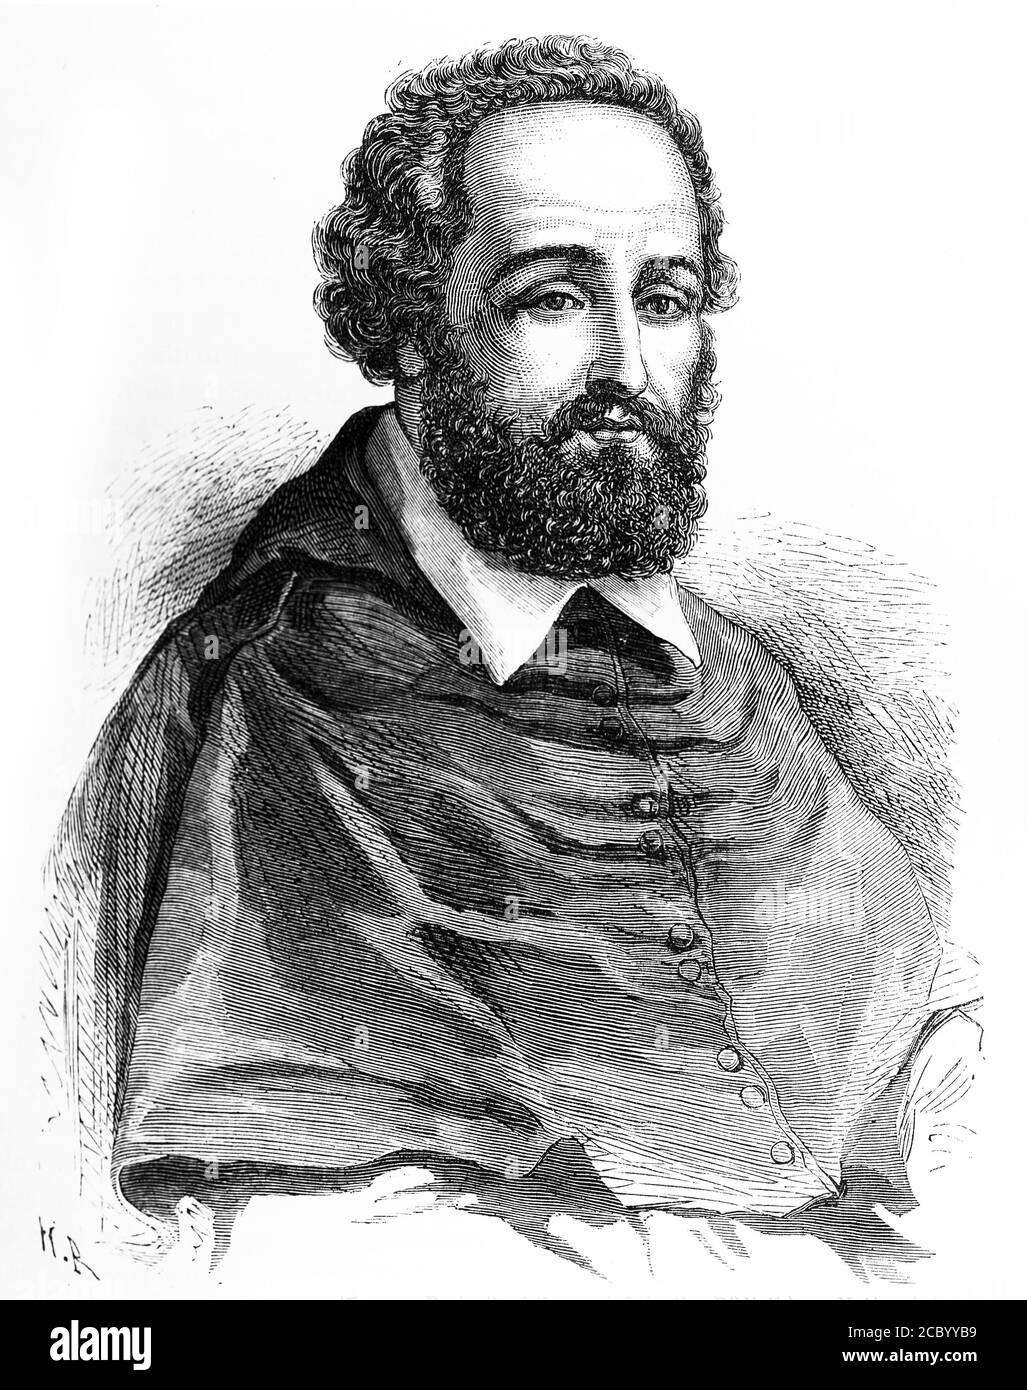 Engraving of Antoine Perrenot de Granvelle (1517 – 1586), Comte de La Baume Saint Amour, a Bisontin (Free Imperial City of Besançon) statesman, made a cardinal, who followed his father as a leading minister of the Spanish Habsburgs, and was one of the most influential European politicians during the Reformation Stock Photo